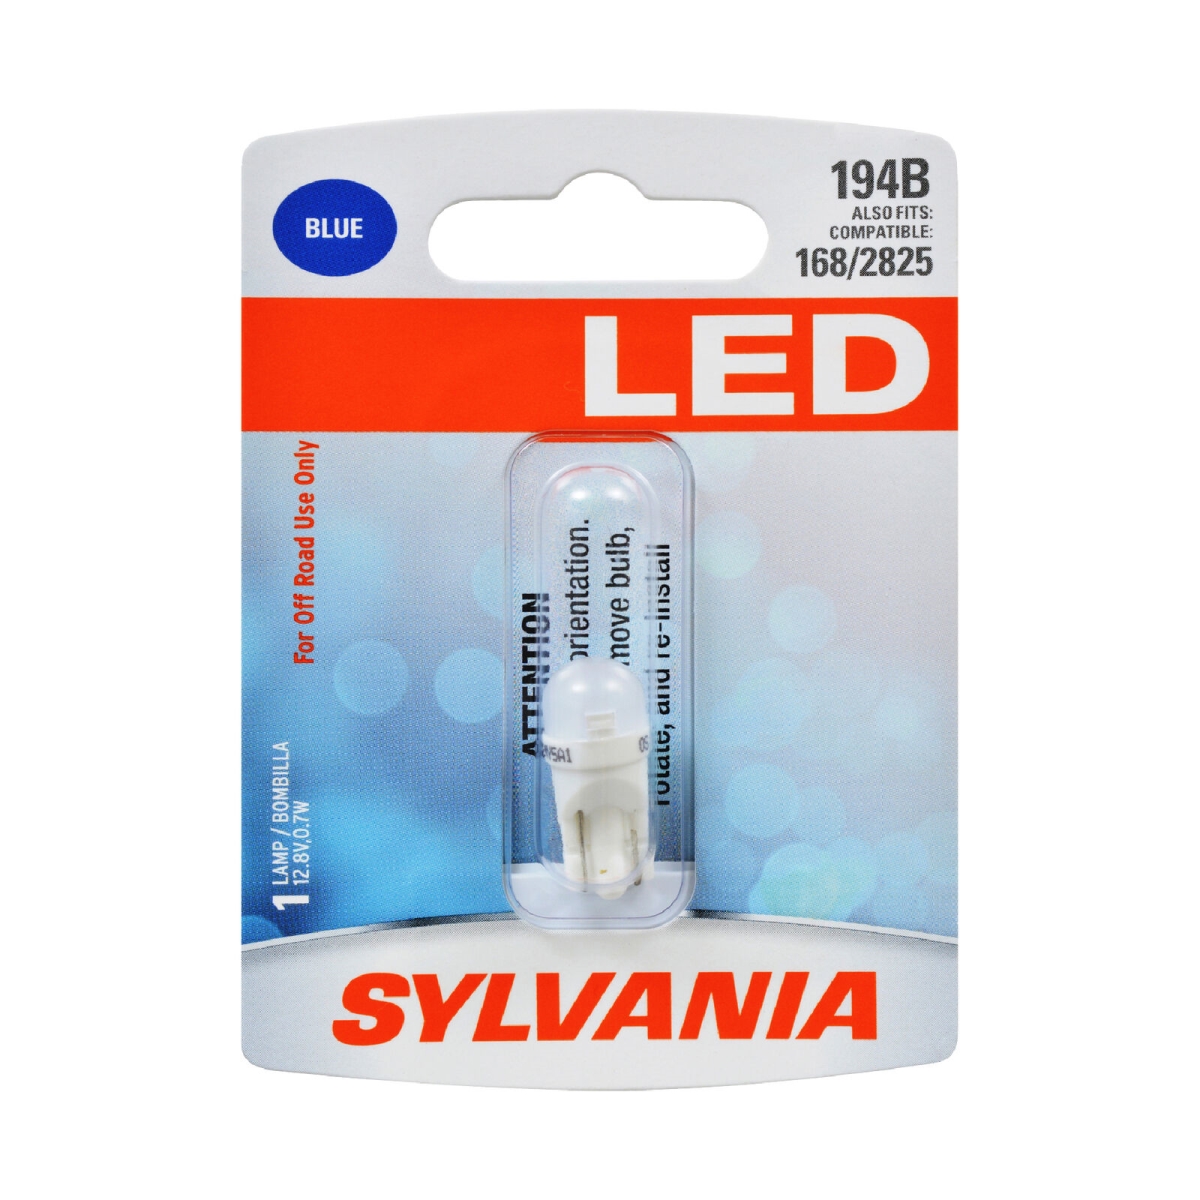 Picture of Sylvania 194BSLBP2 SYLED LED Blue Mini Bulb for 194BSL.BP2 EN-SP